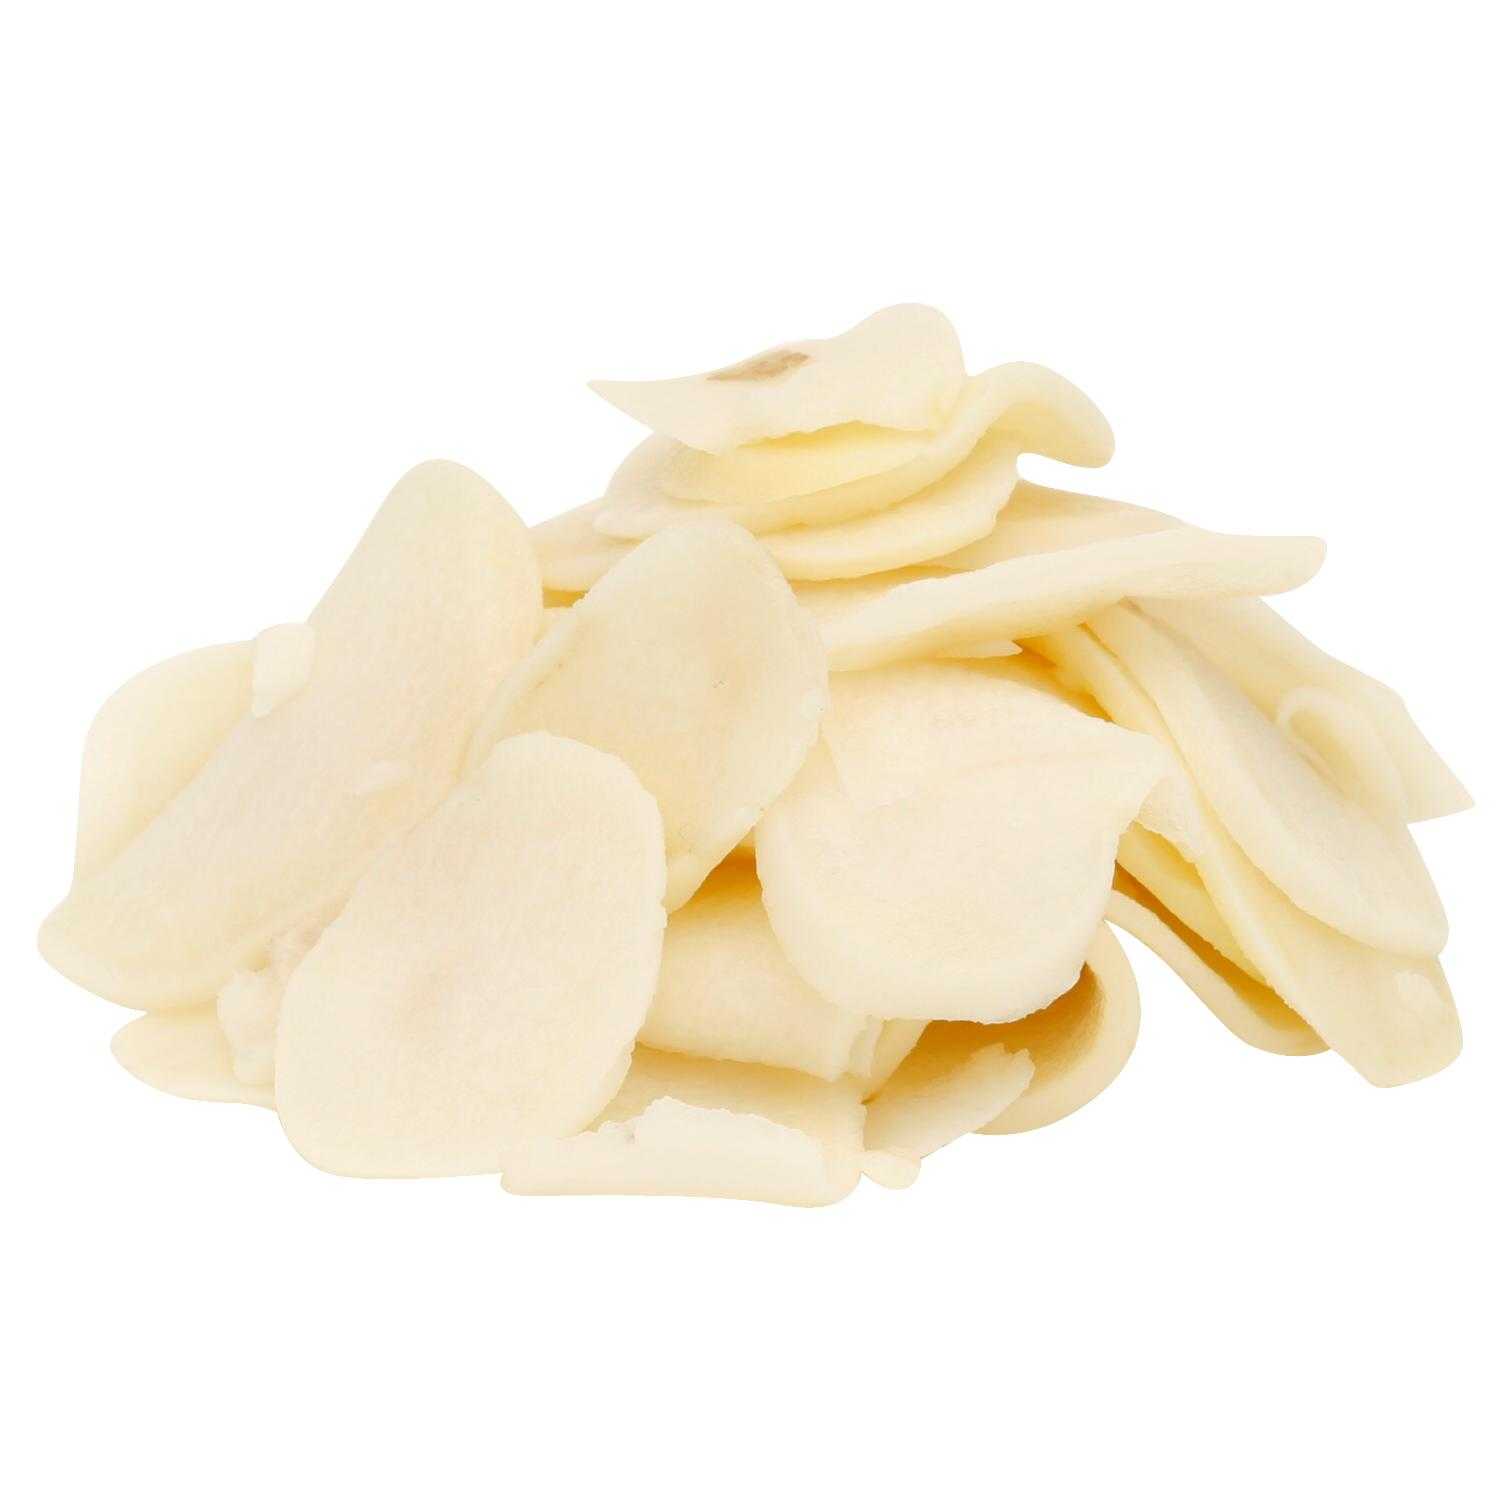 Simply Potatoes® Refrigerated American Home Fries Sliced Potatoes made with peeled Russet potatoes sliced 1/8″ thick, 2/10 Lb Bags